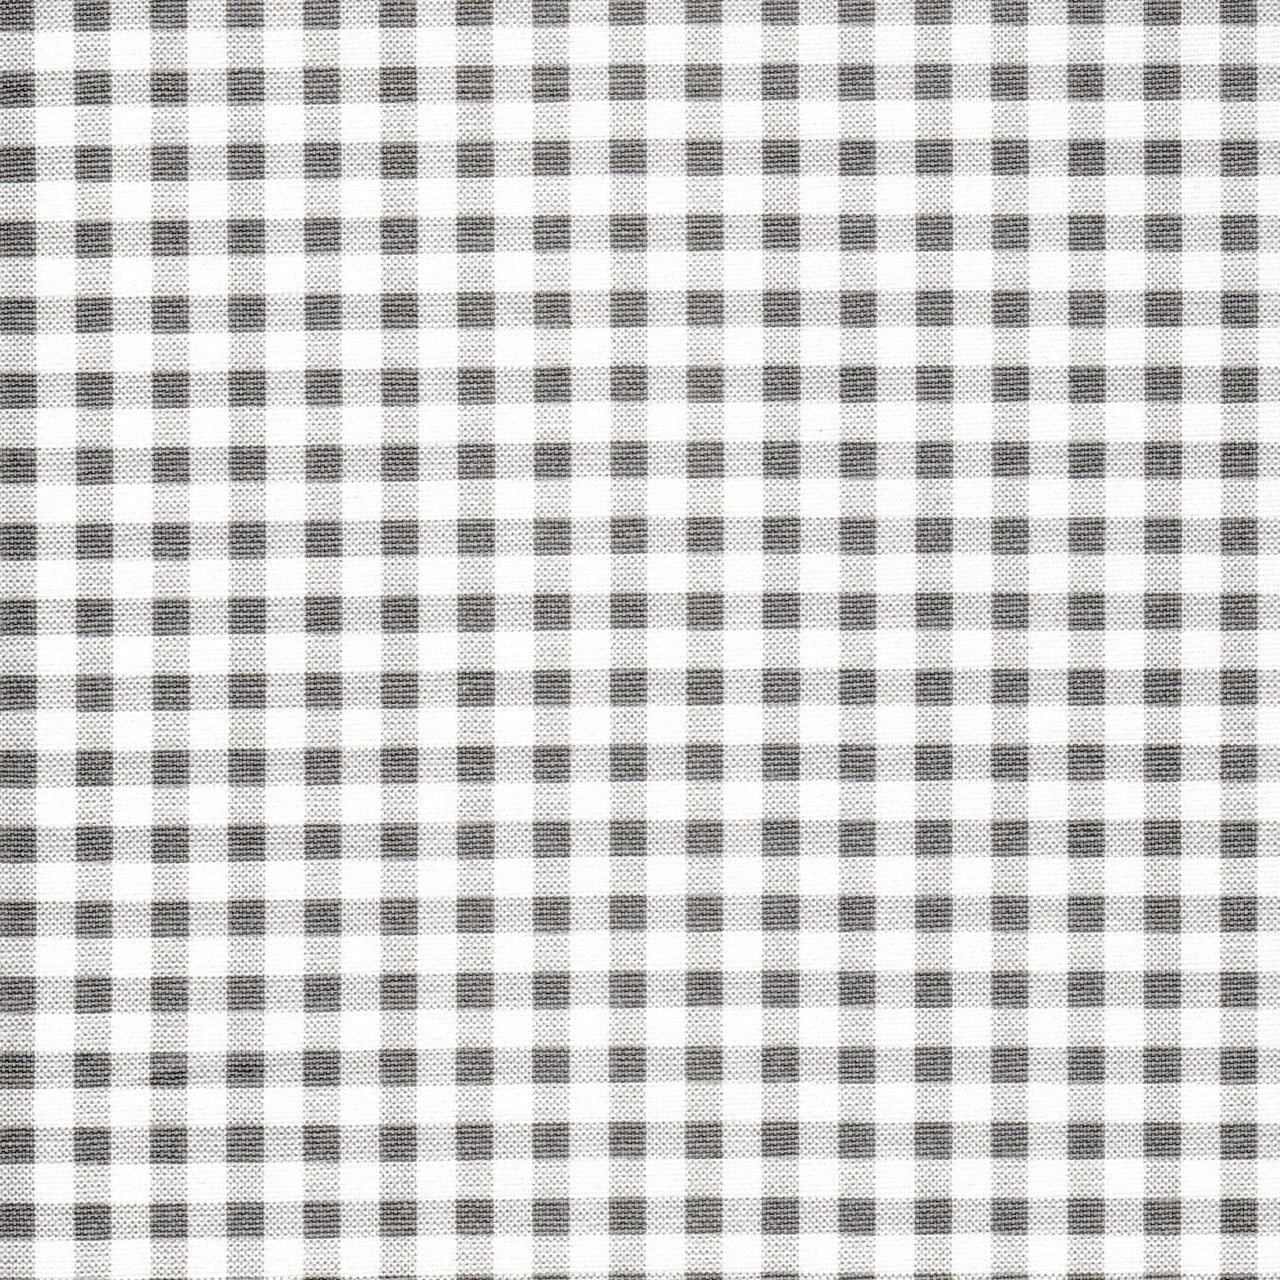 Tailored Bedskirt in Storm Gray Large Gingham Check on White